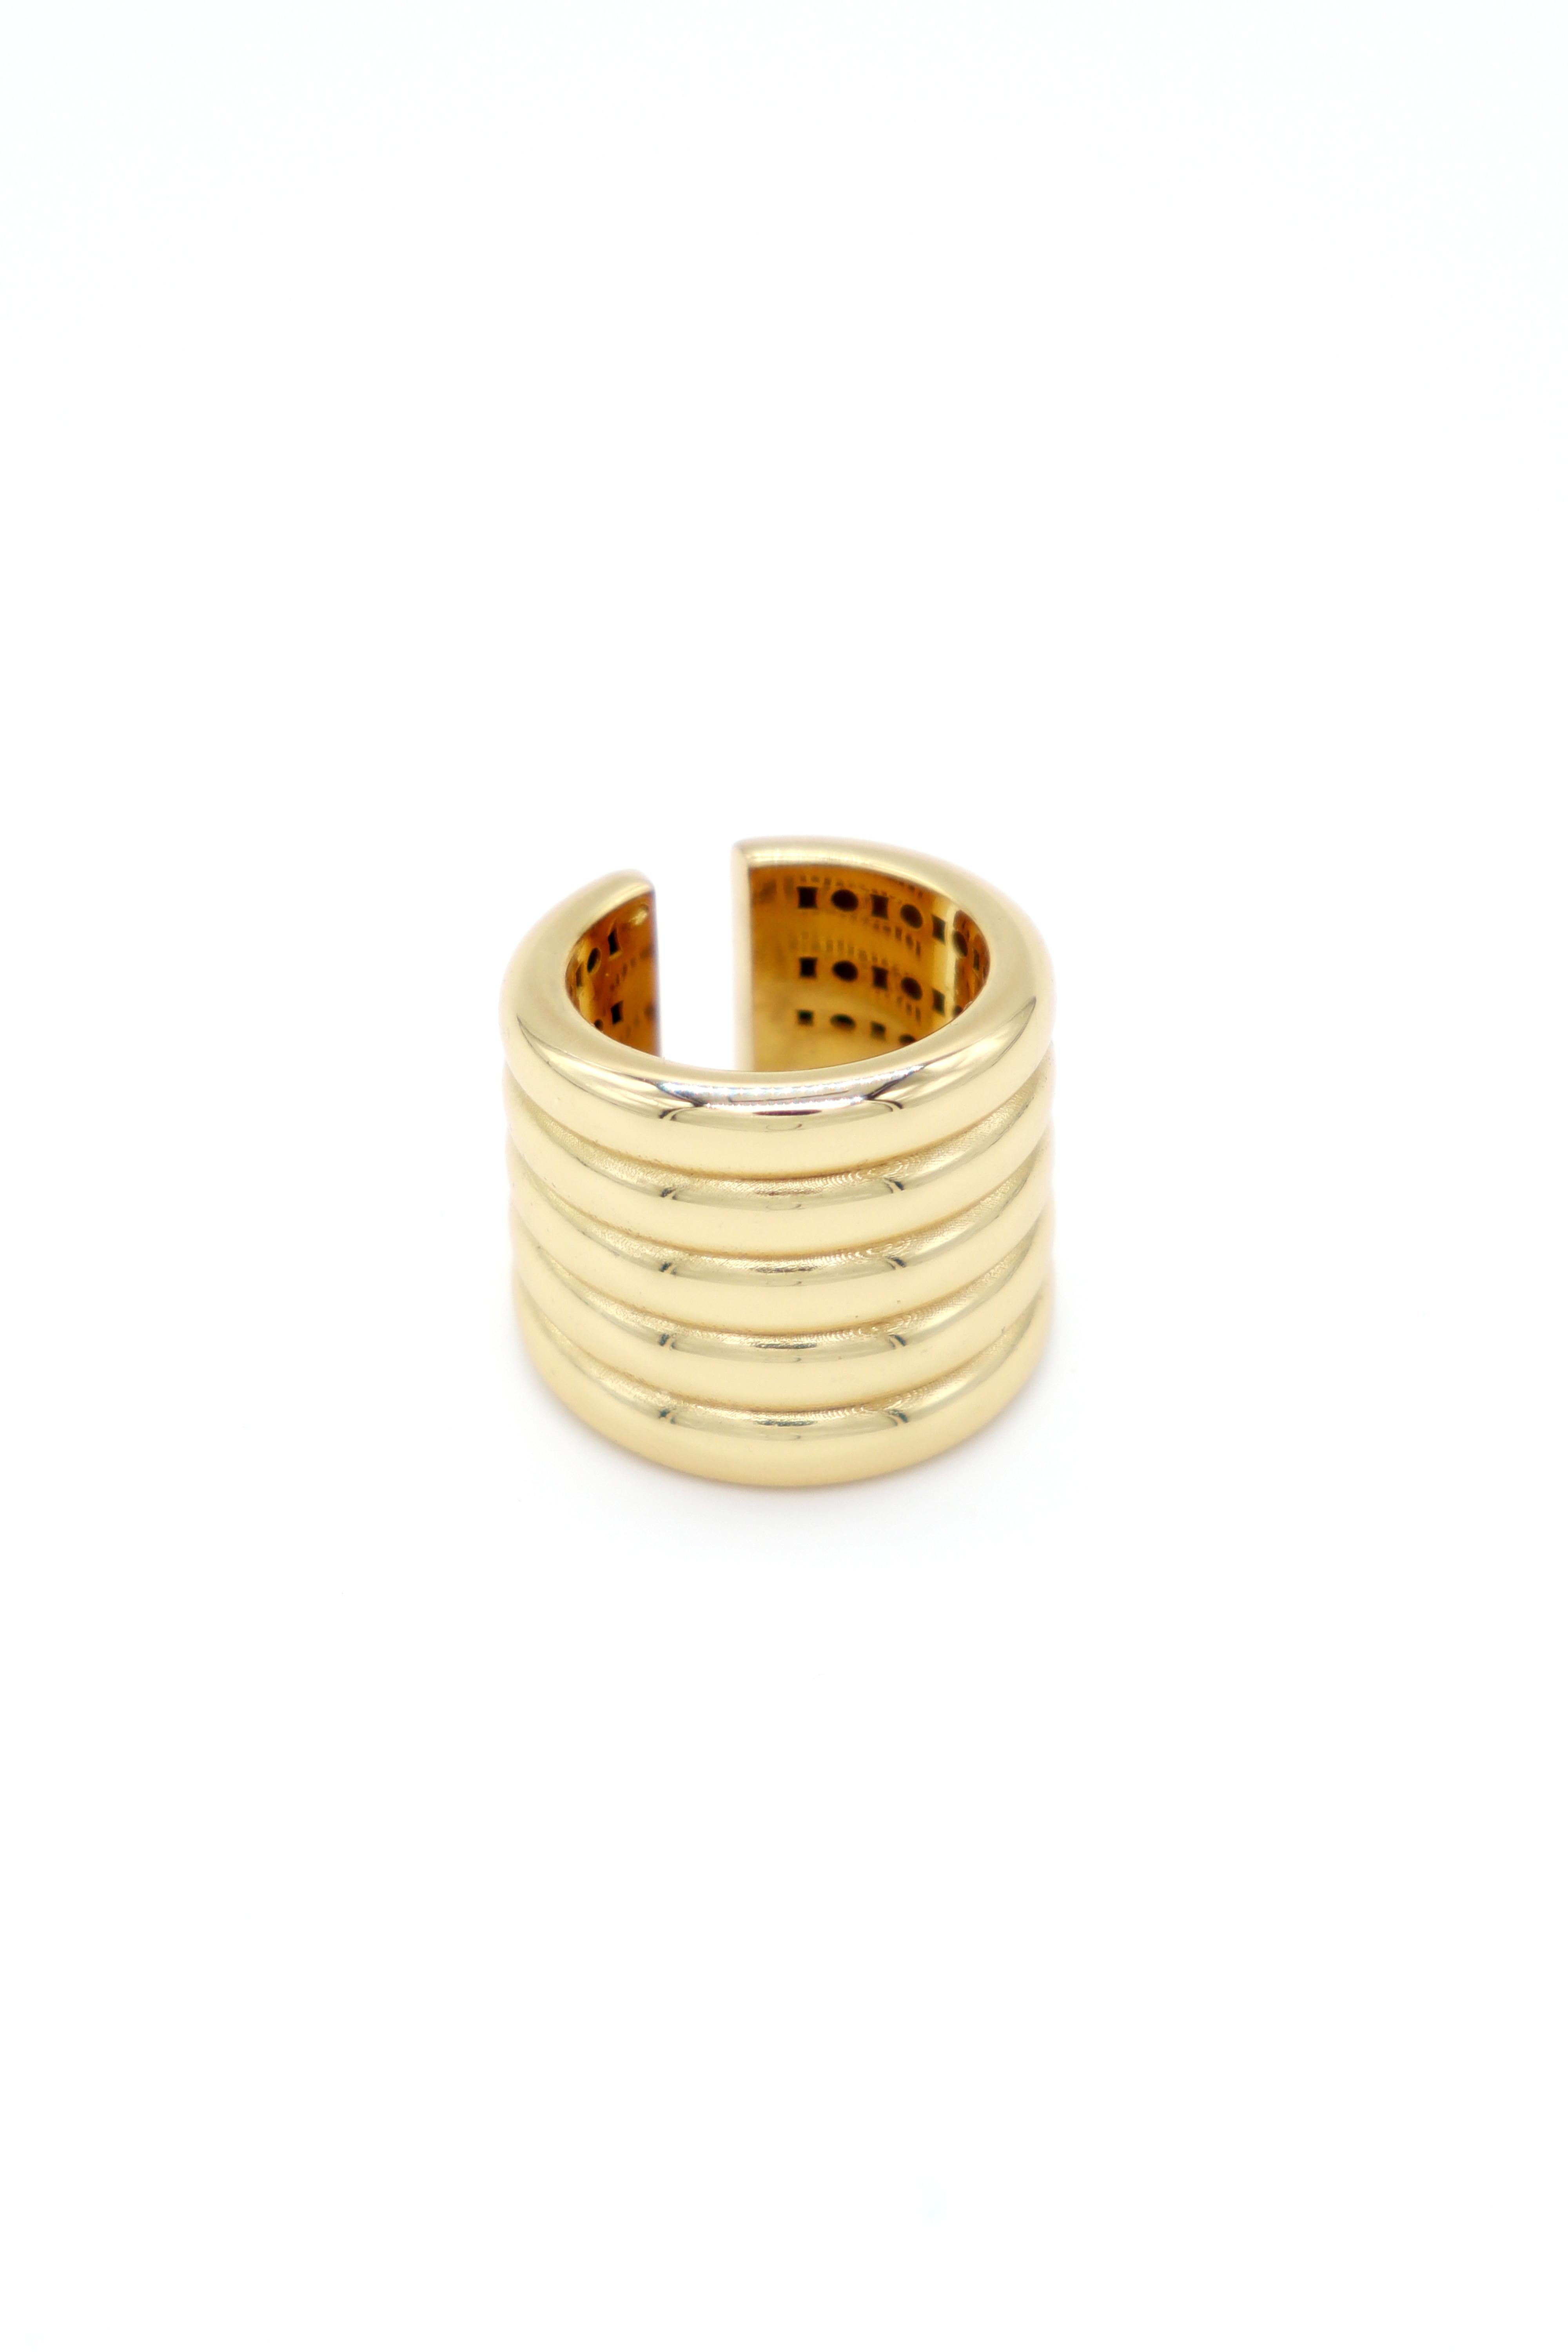 Band ring, 925 sterling silver, 18 kt. gold plated, adjustable, Samantha In New Condition For Sale In Capri, IT